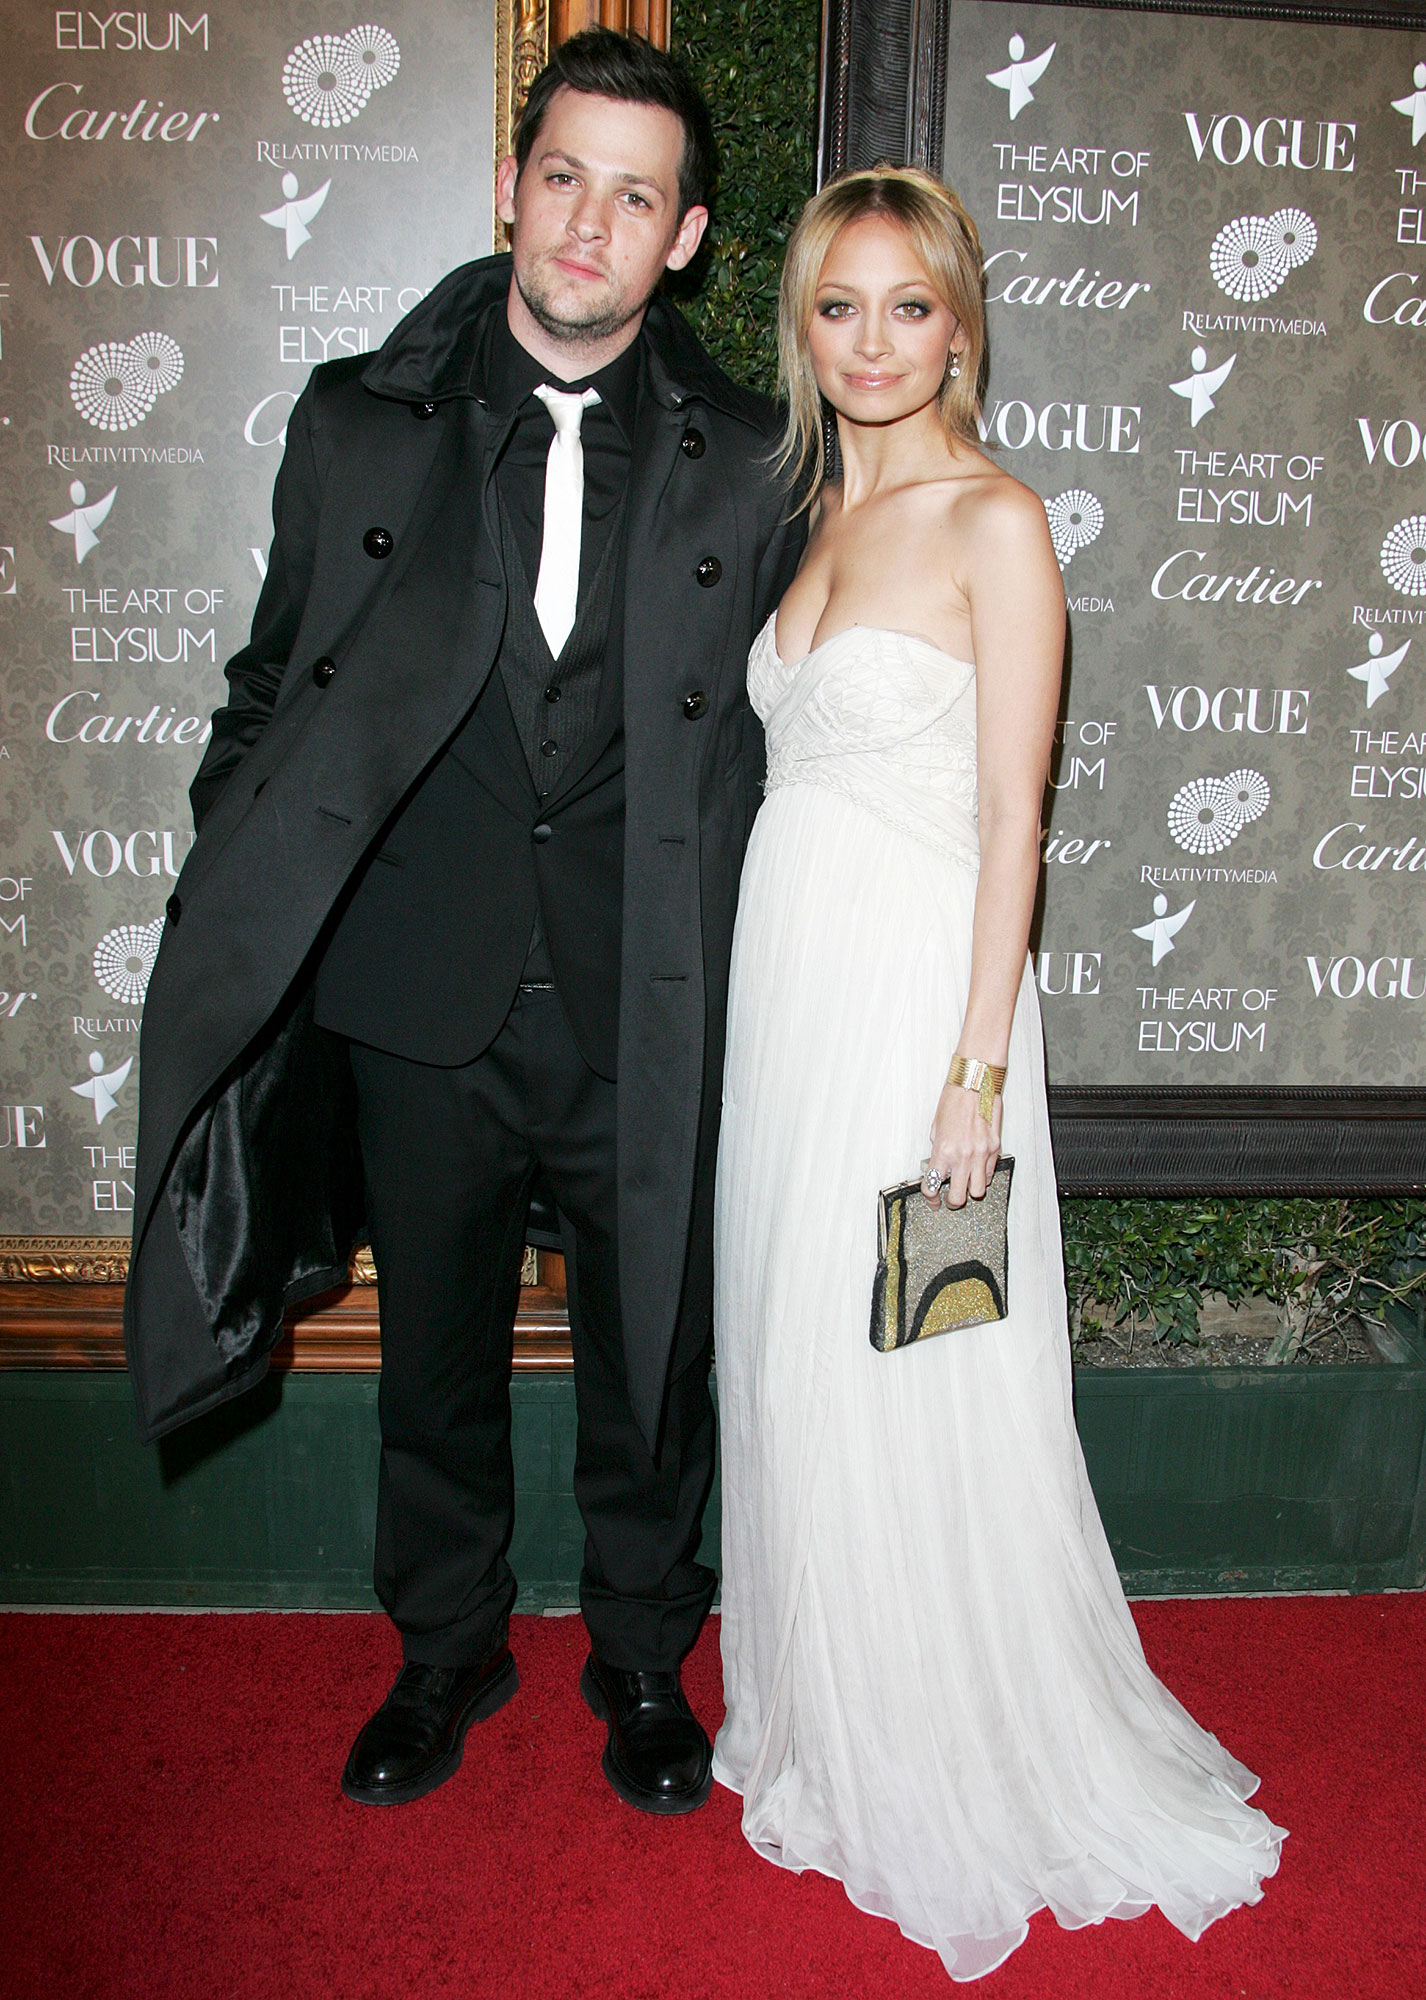 Joel Madden and Nicole Richie at The Art of the Elysium Second Annual Black Tie Charity Gala in 2009 Nicole Richie and Joel Madden Most Romantic Moments